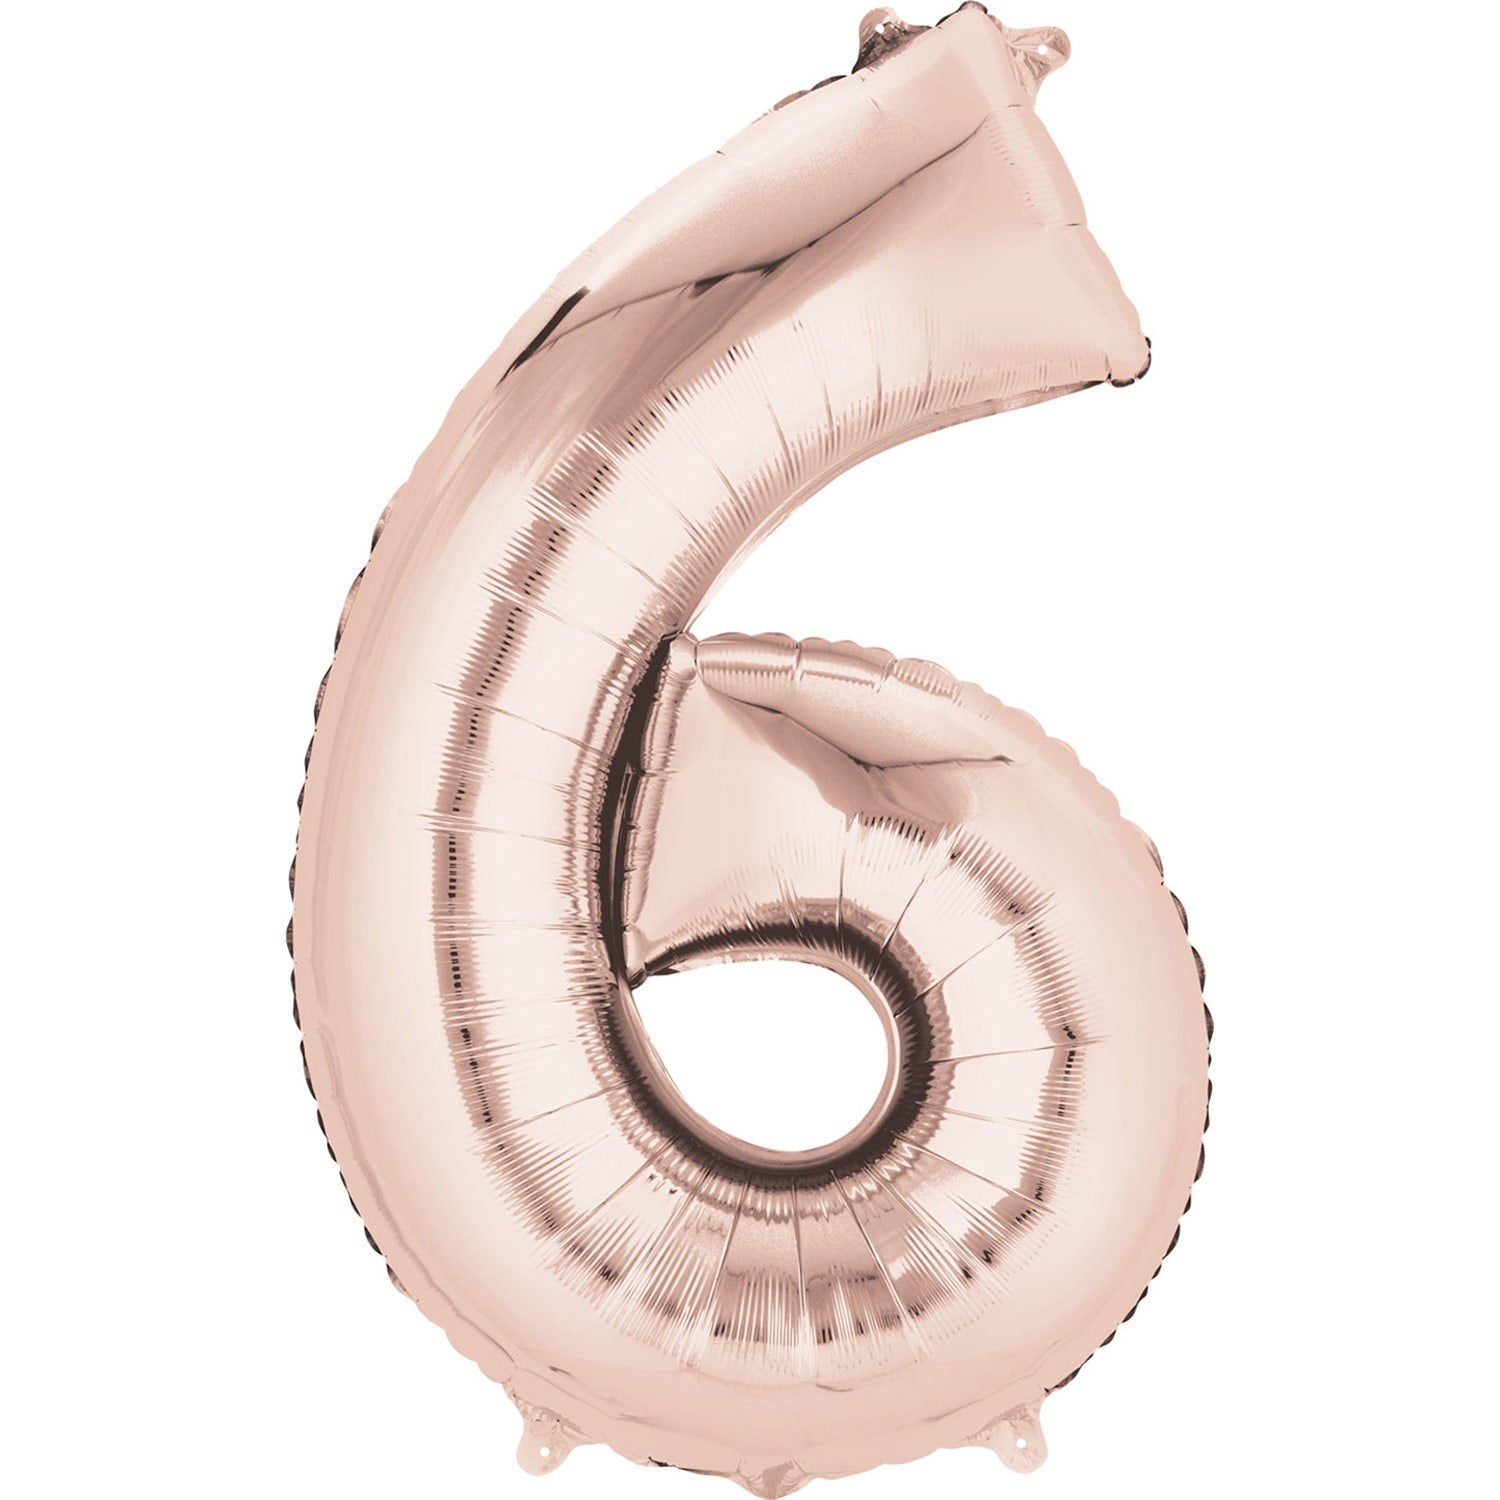 40cm (16in) Minishape Number 6 Rose Gold Foil Balloon Air Fill, Includes straw for air inflation.